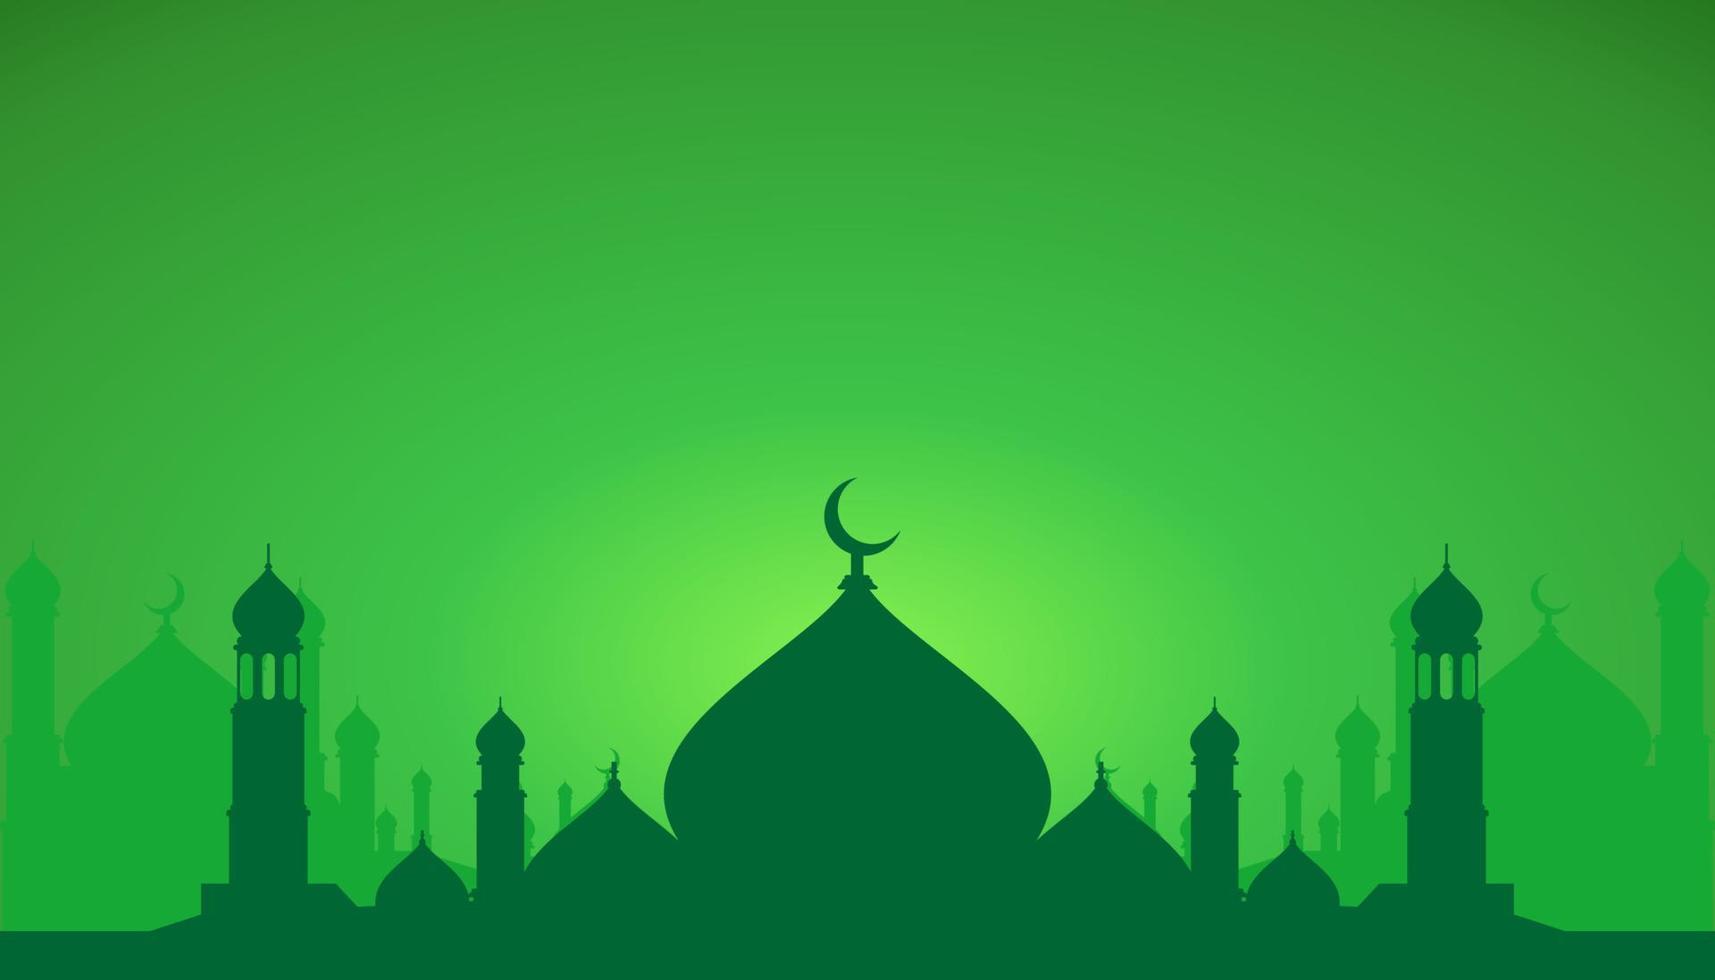 Mosque background. Islamic design vector for background. Mosque silhouette design illustration. Abstract Islamic background. Islamic background with green color vector design illustration.